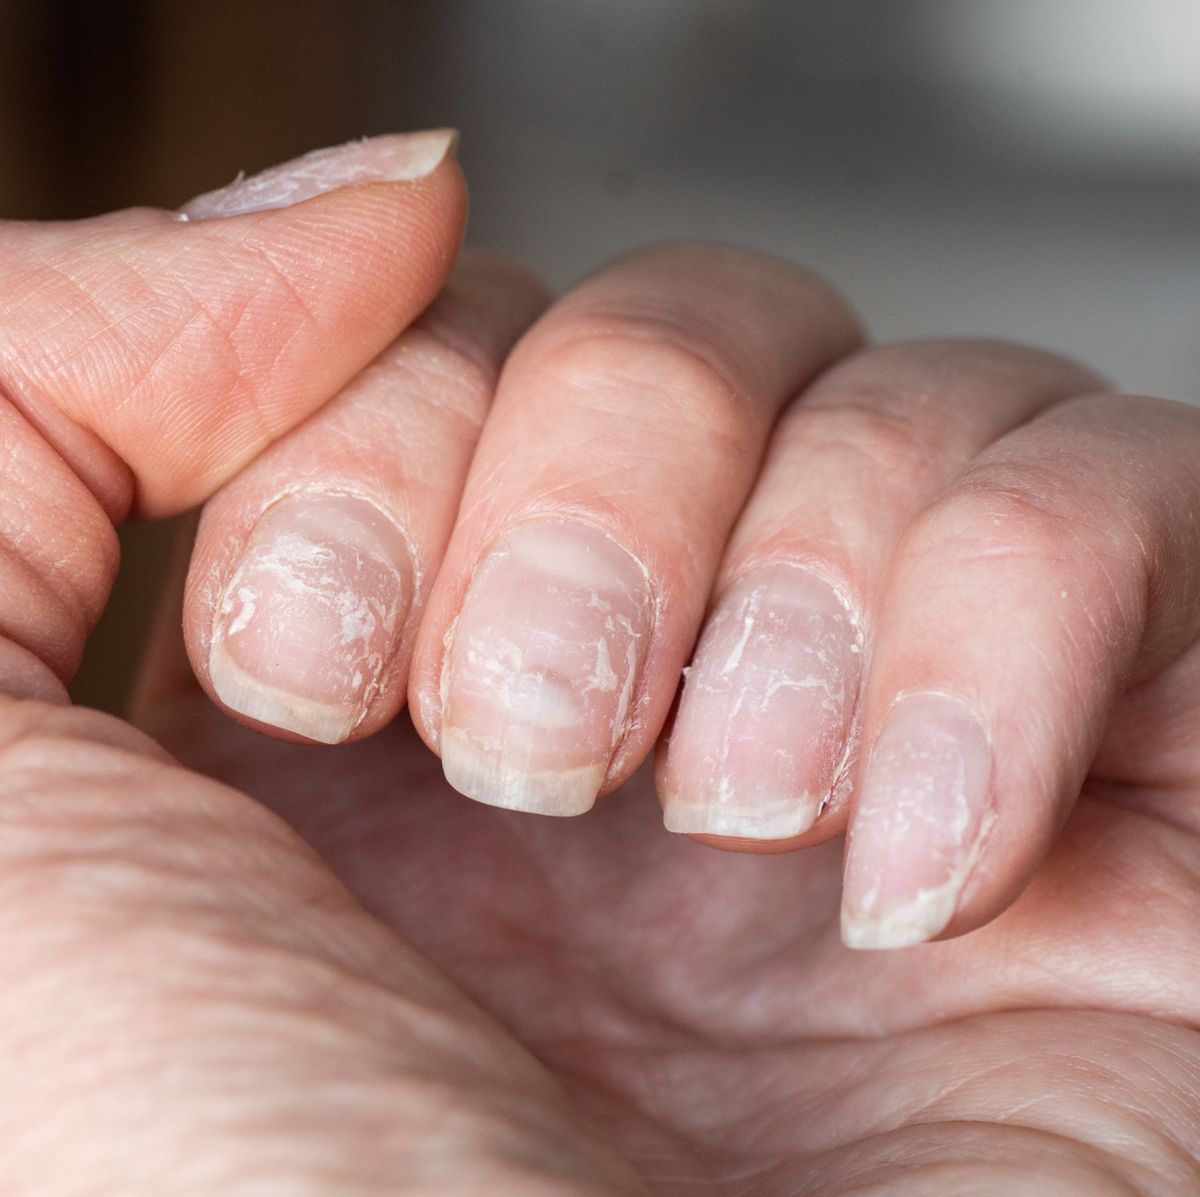 Why Are My Nails Peeling? - 7 Causes of Flaking, Peeling Nails